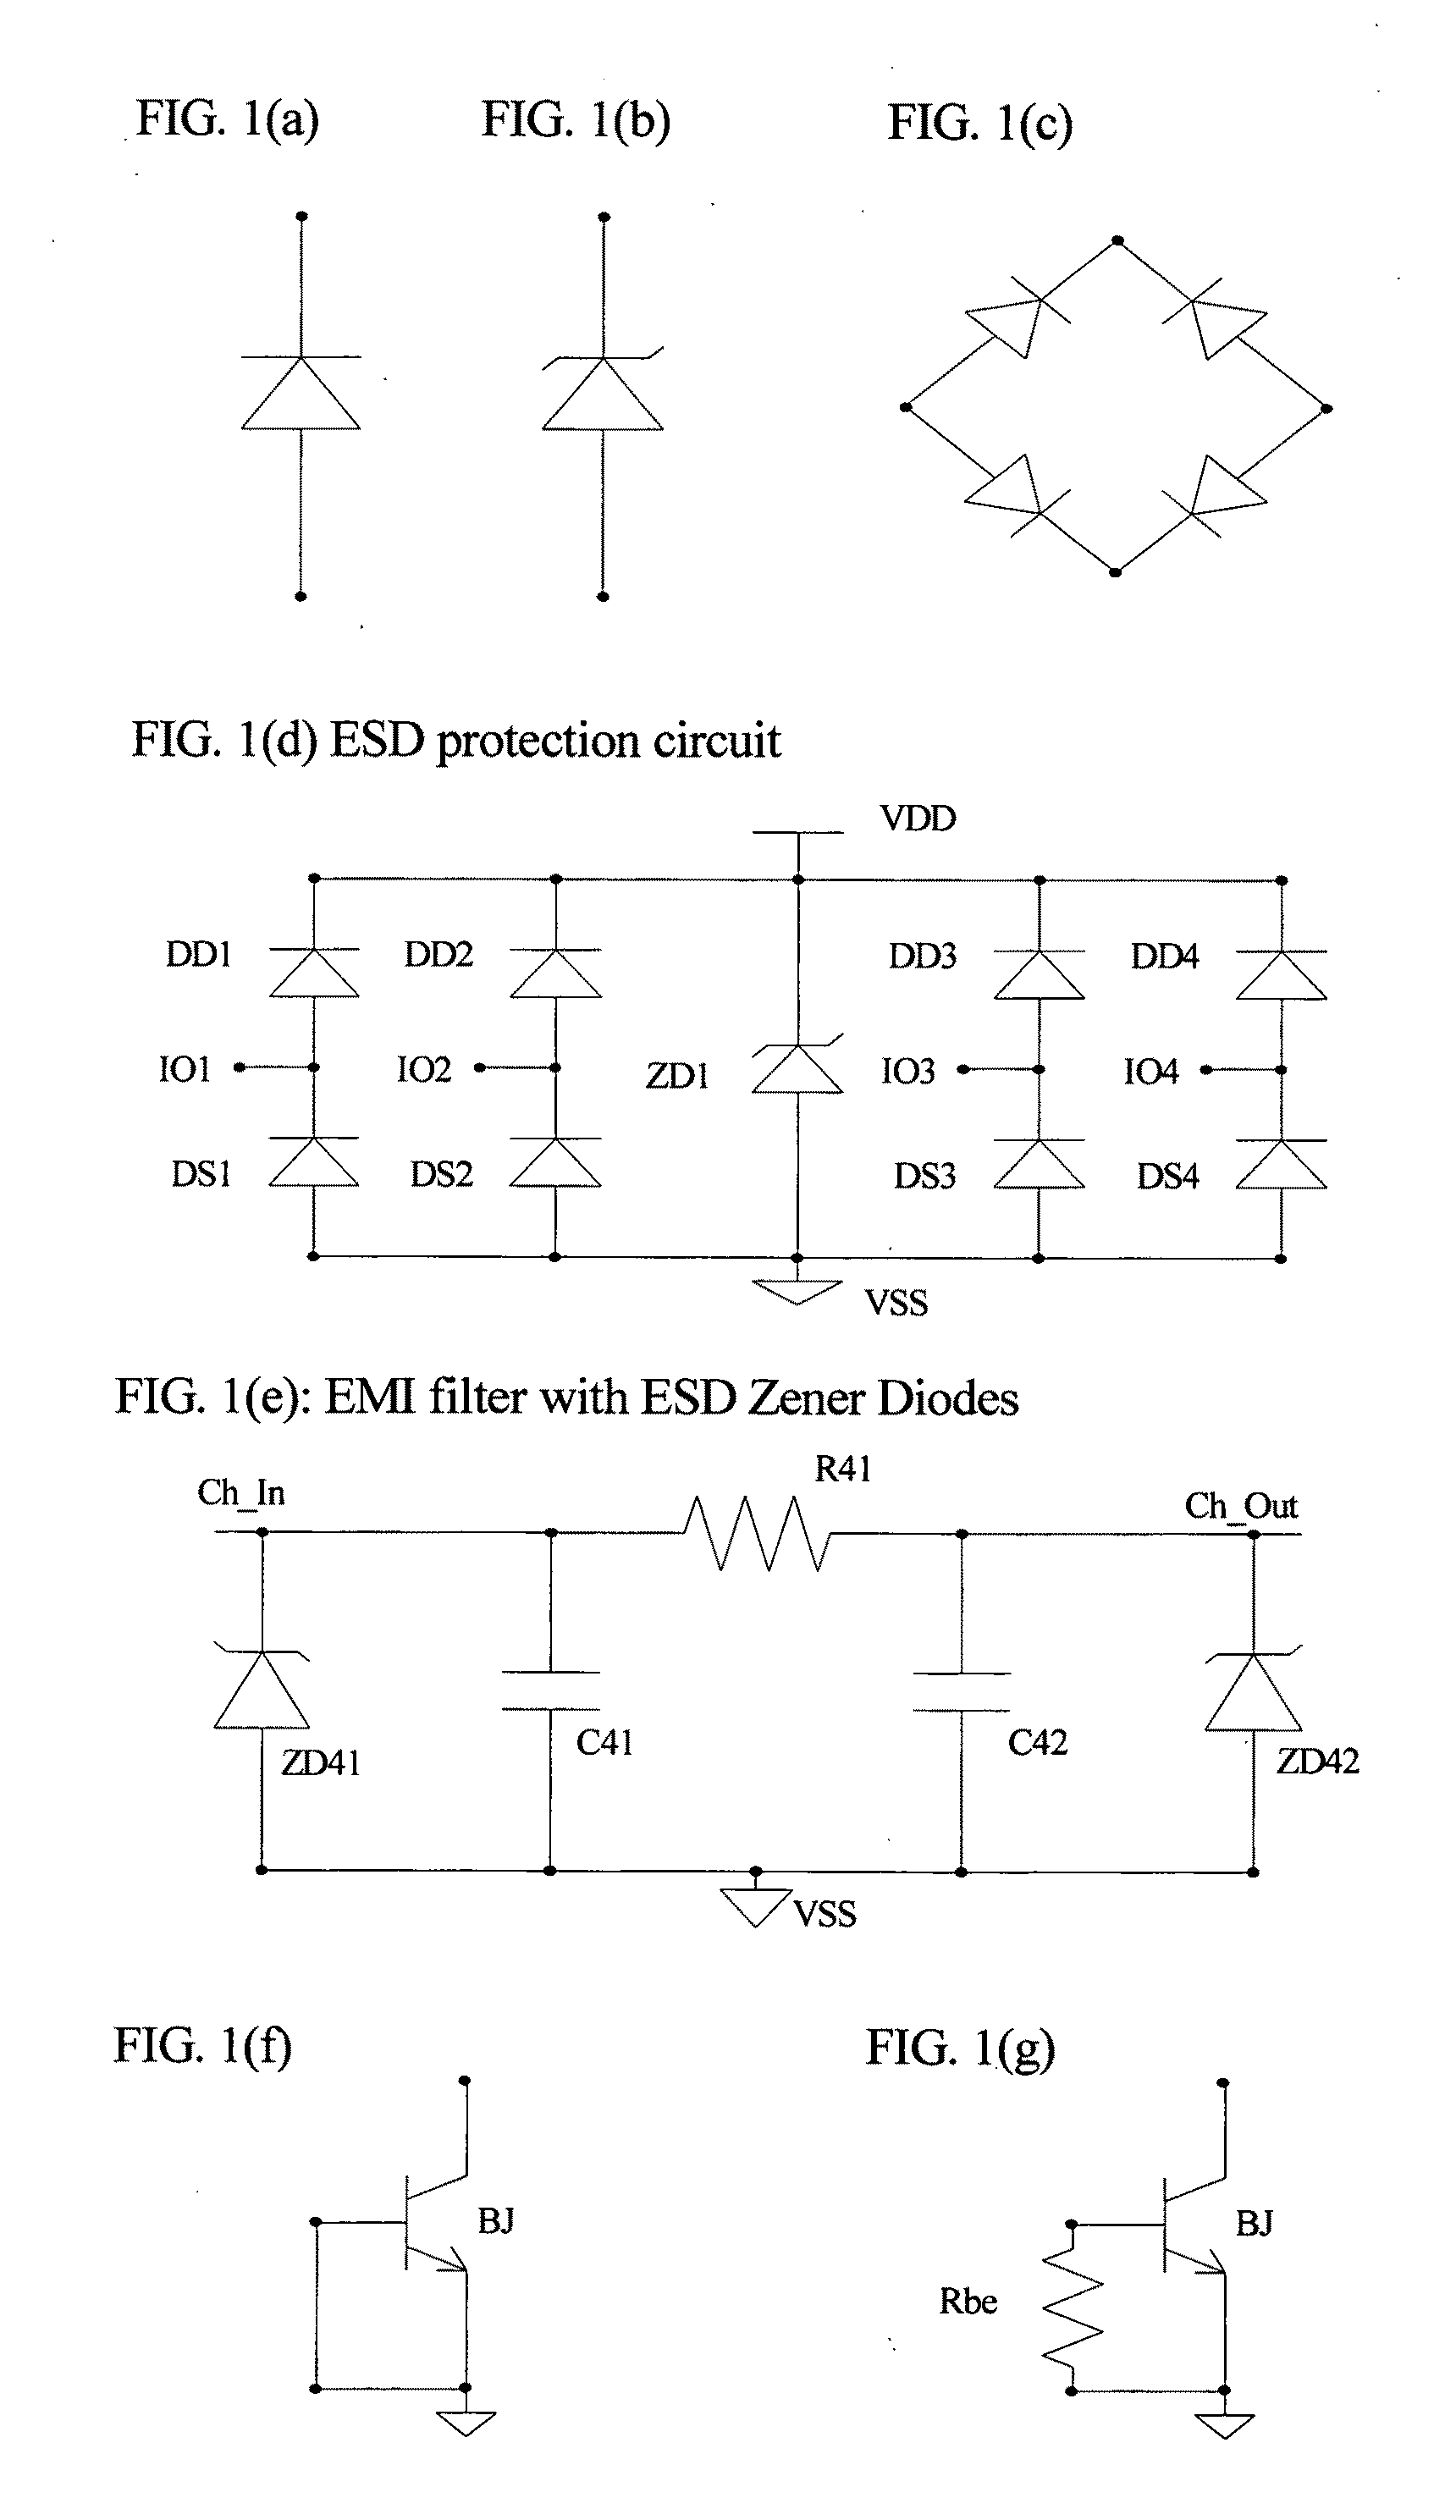 Area reduction for electrical diode chips